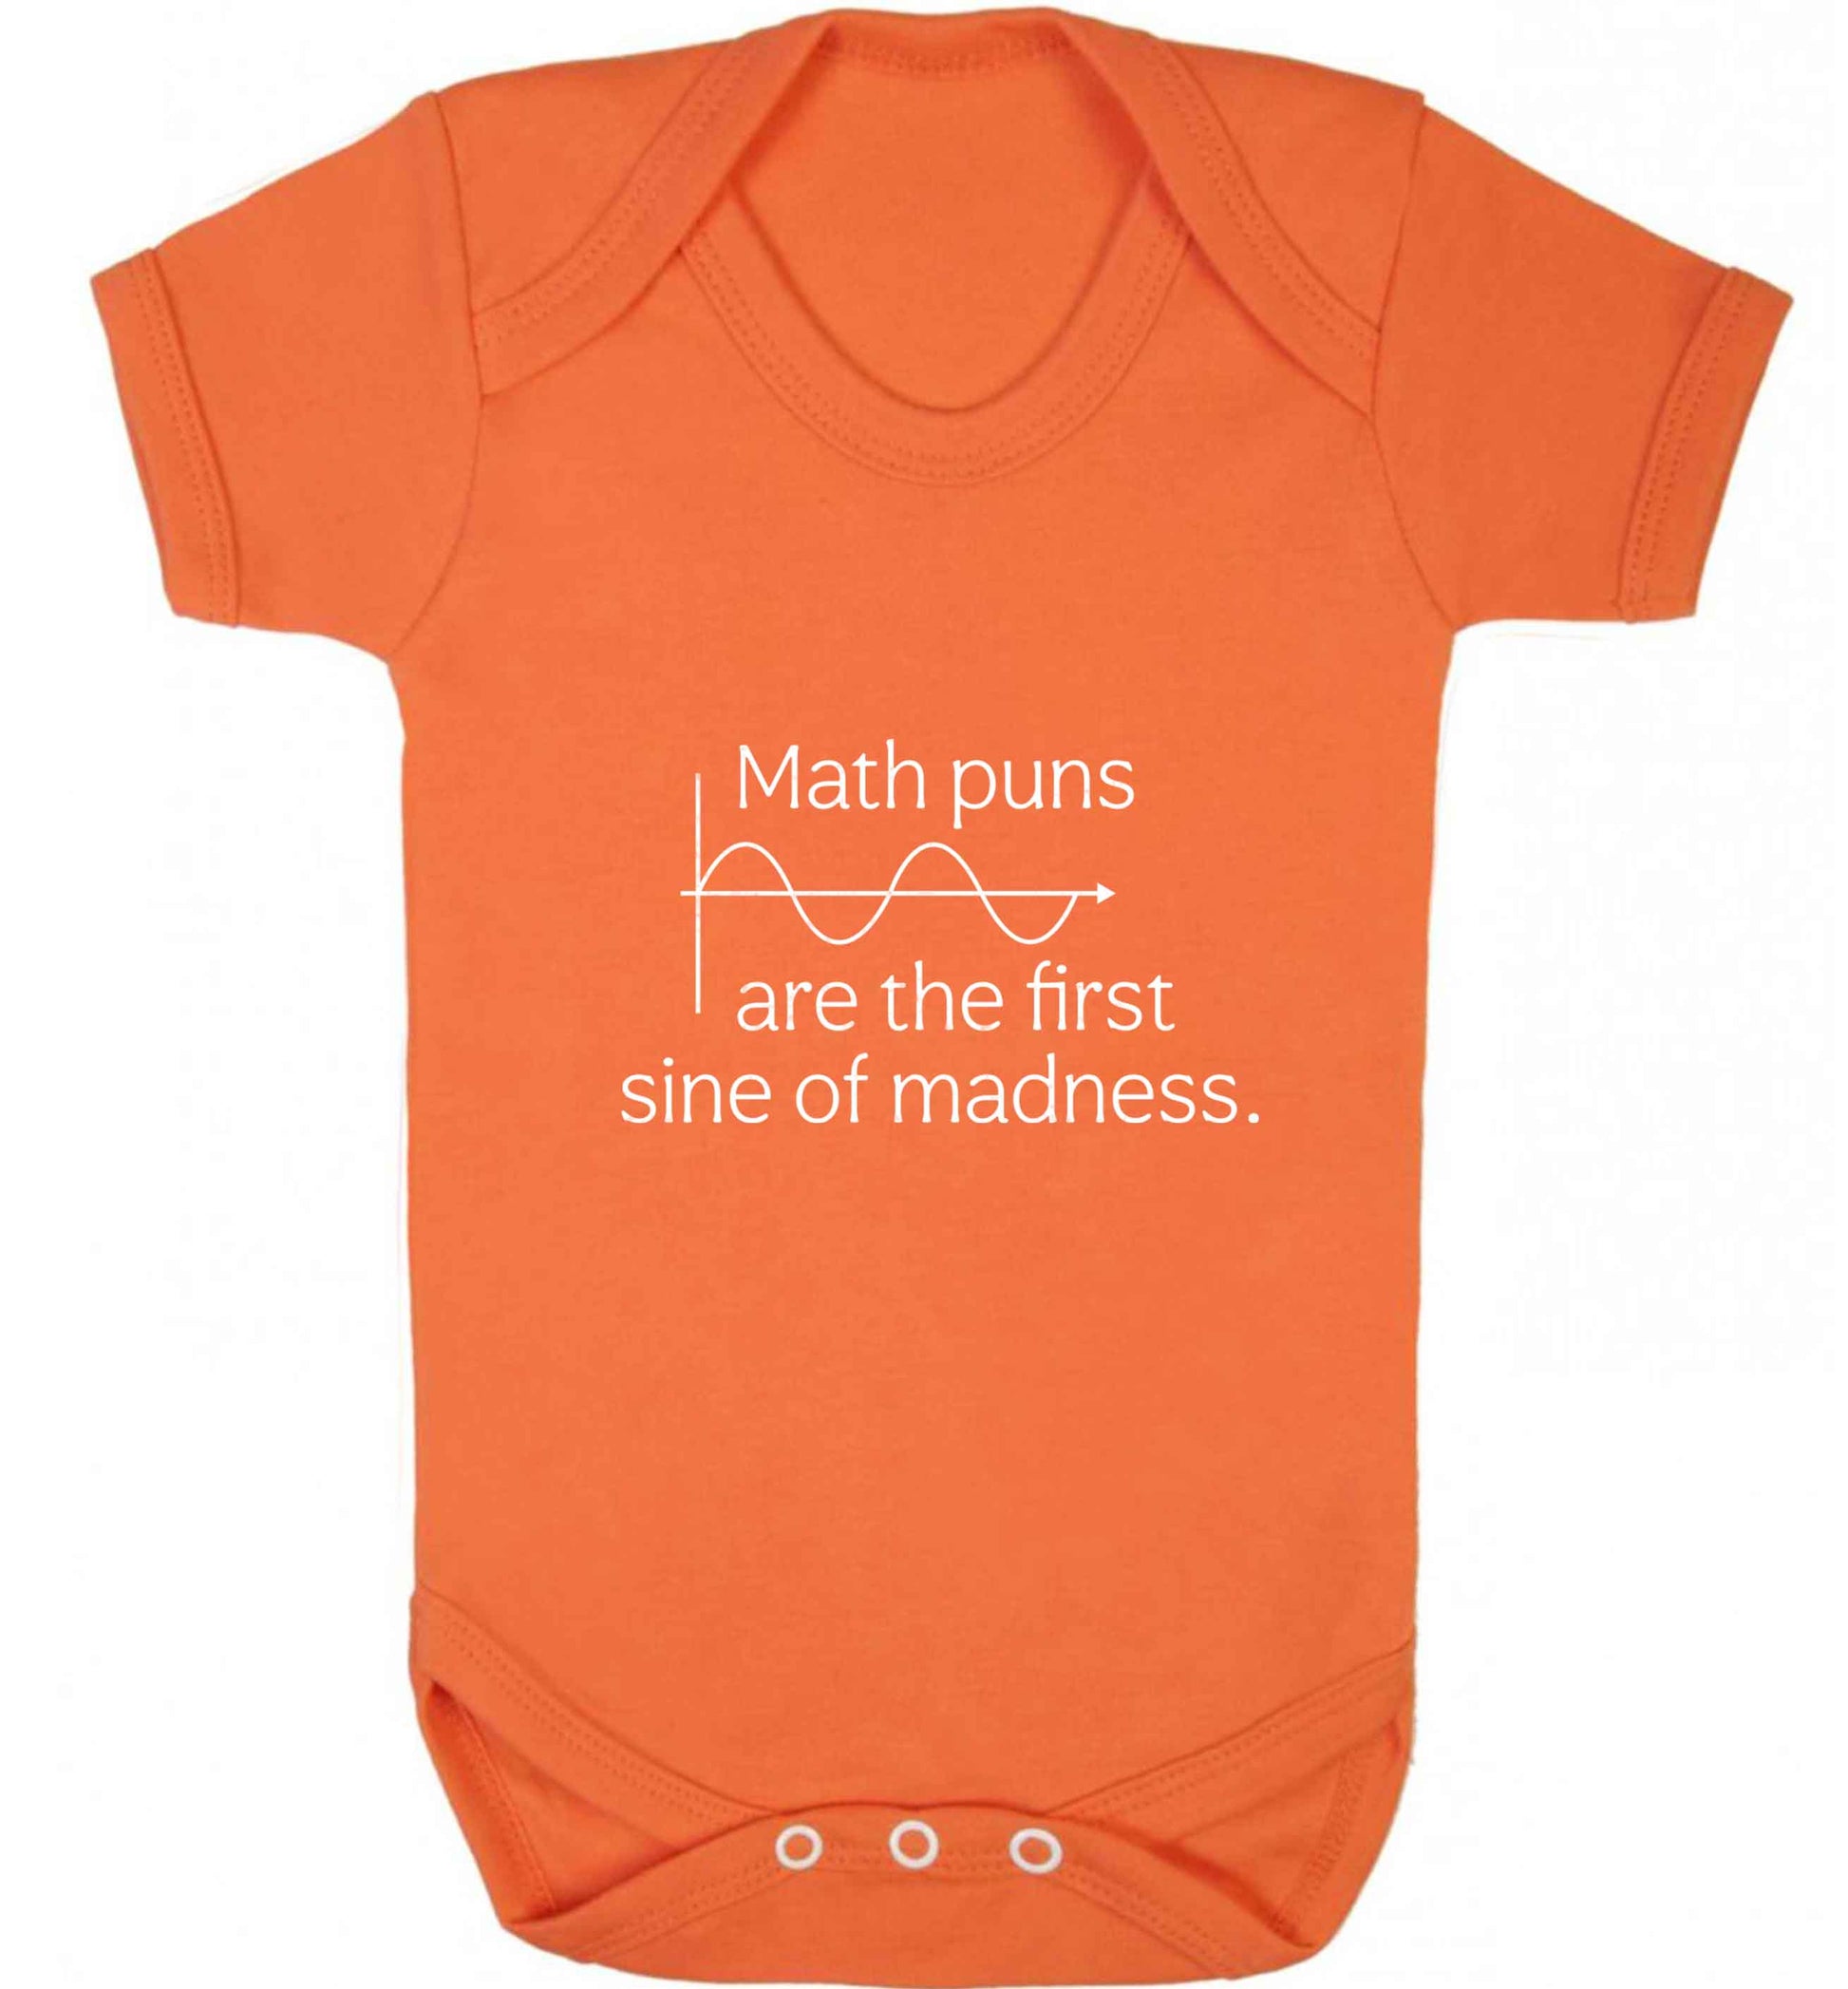 Math puns are the first sine of madness baby vest orange 18-24 months